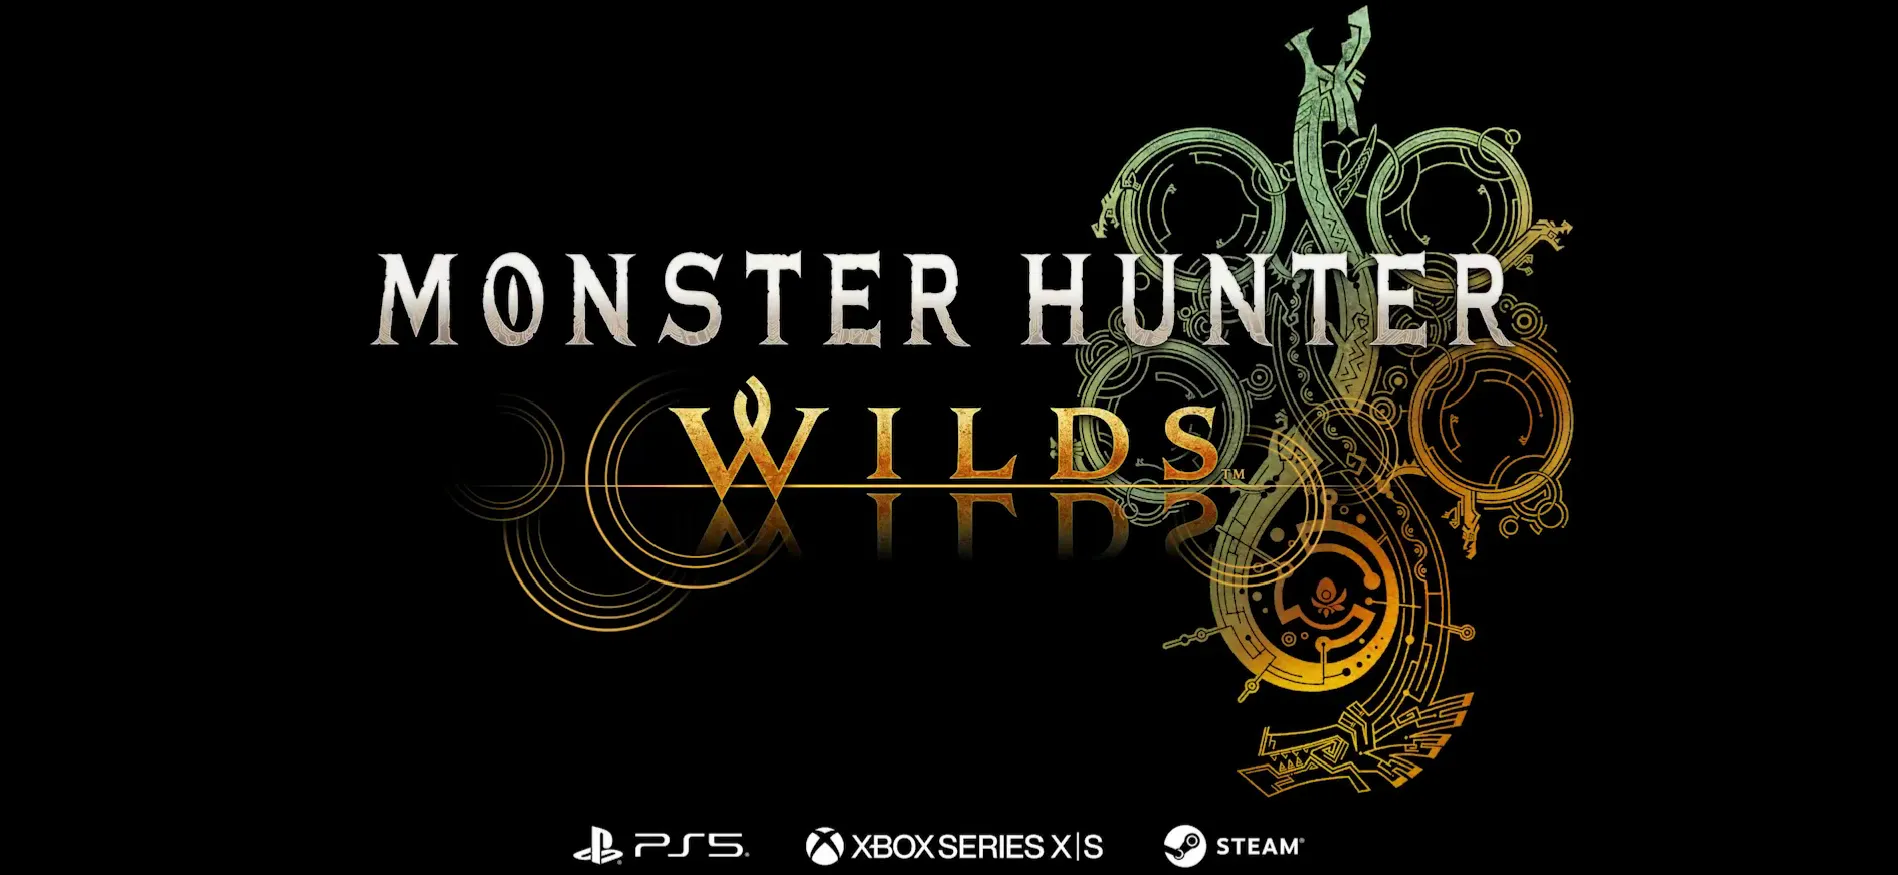 What platforms is Monster Hunter Wilds on? - Dot Esports